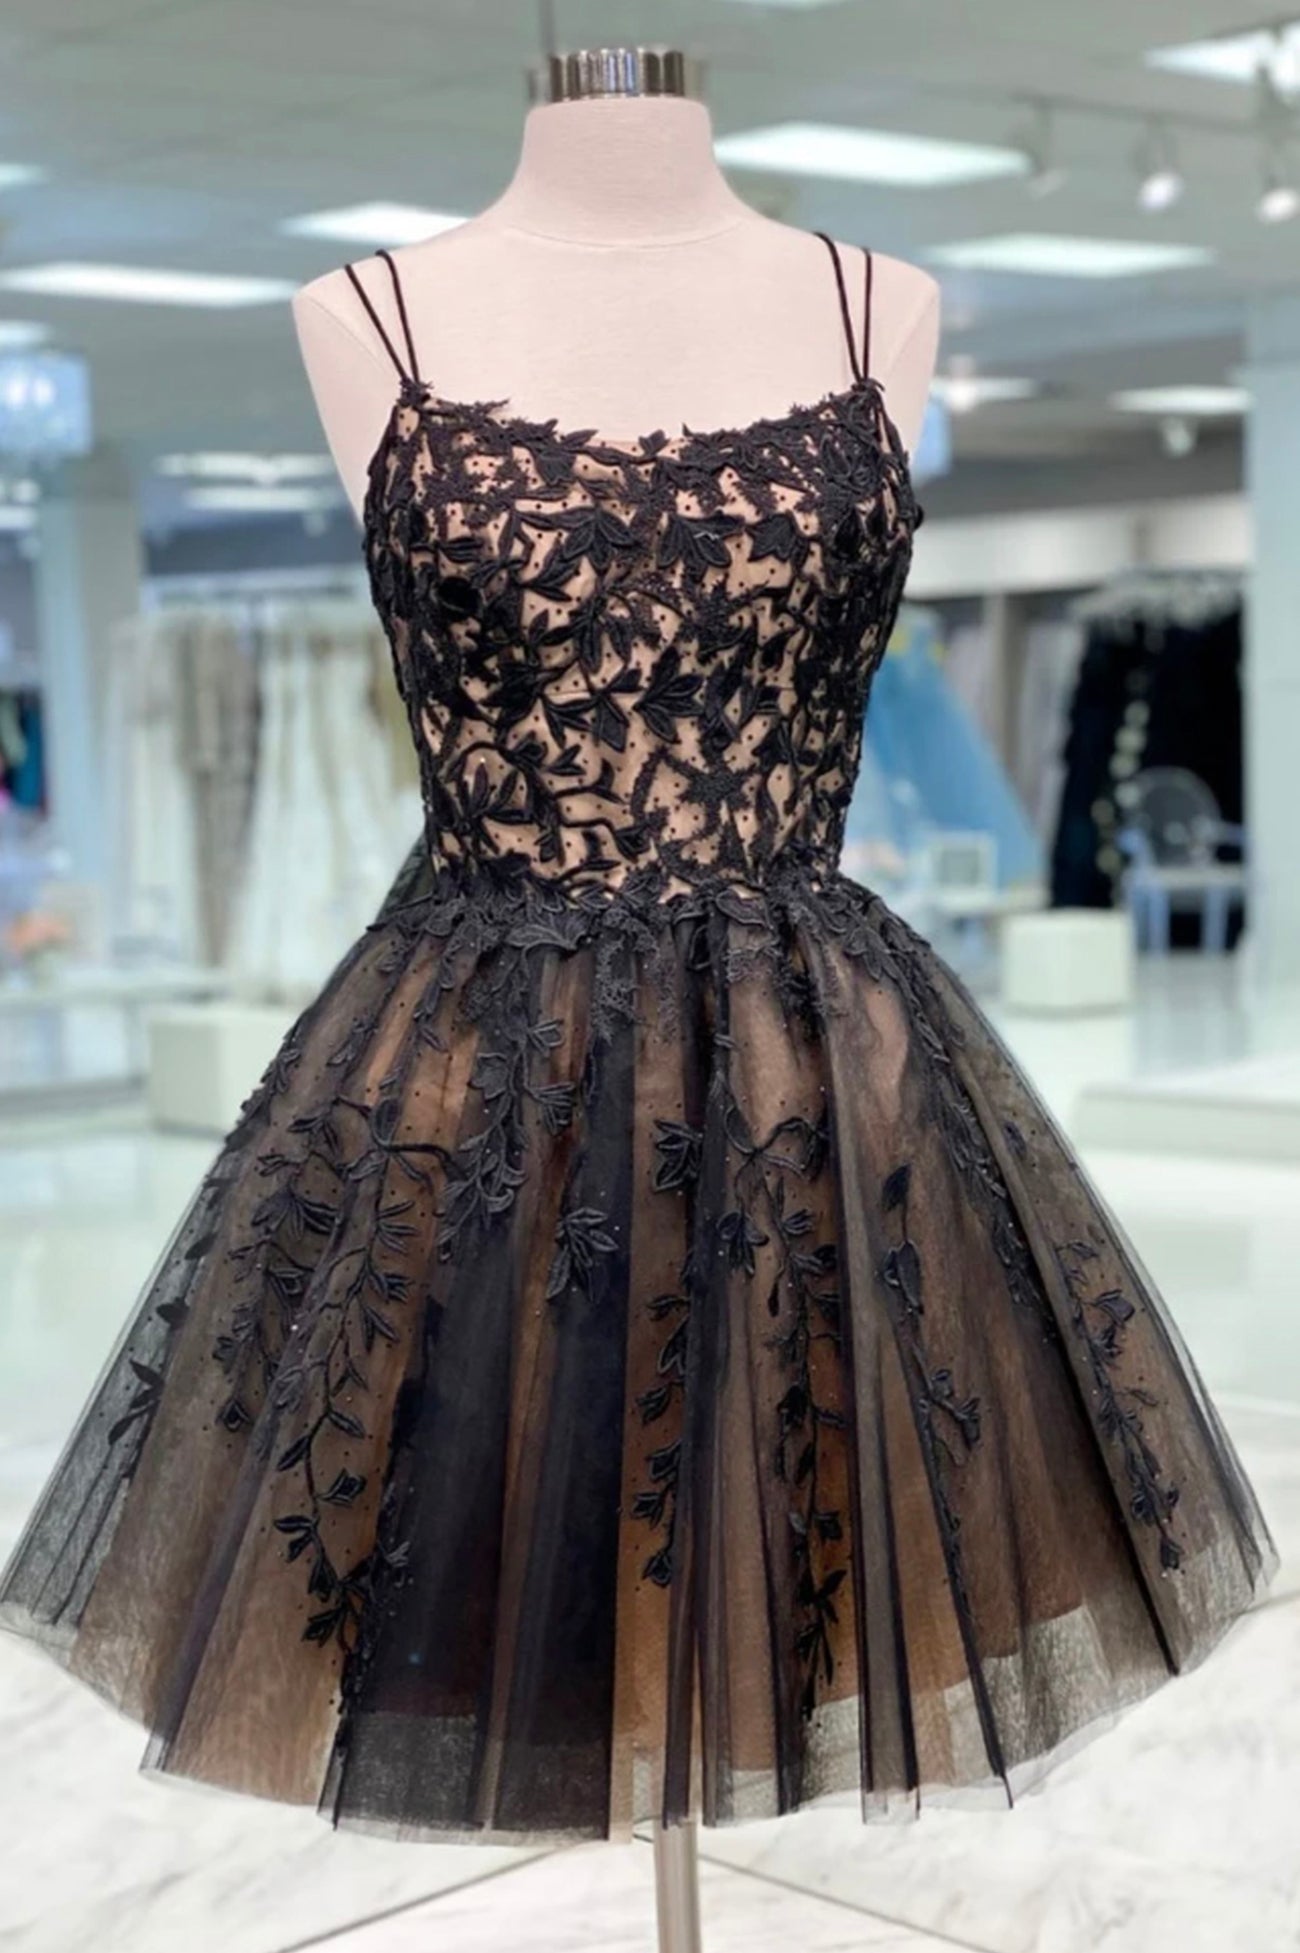 Prom Dresses With Sleeve, Black Lace Short Prom Dress, Cute A-Line Homecoming Party Dress